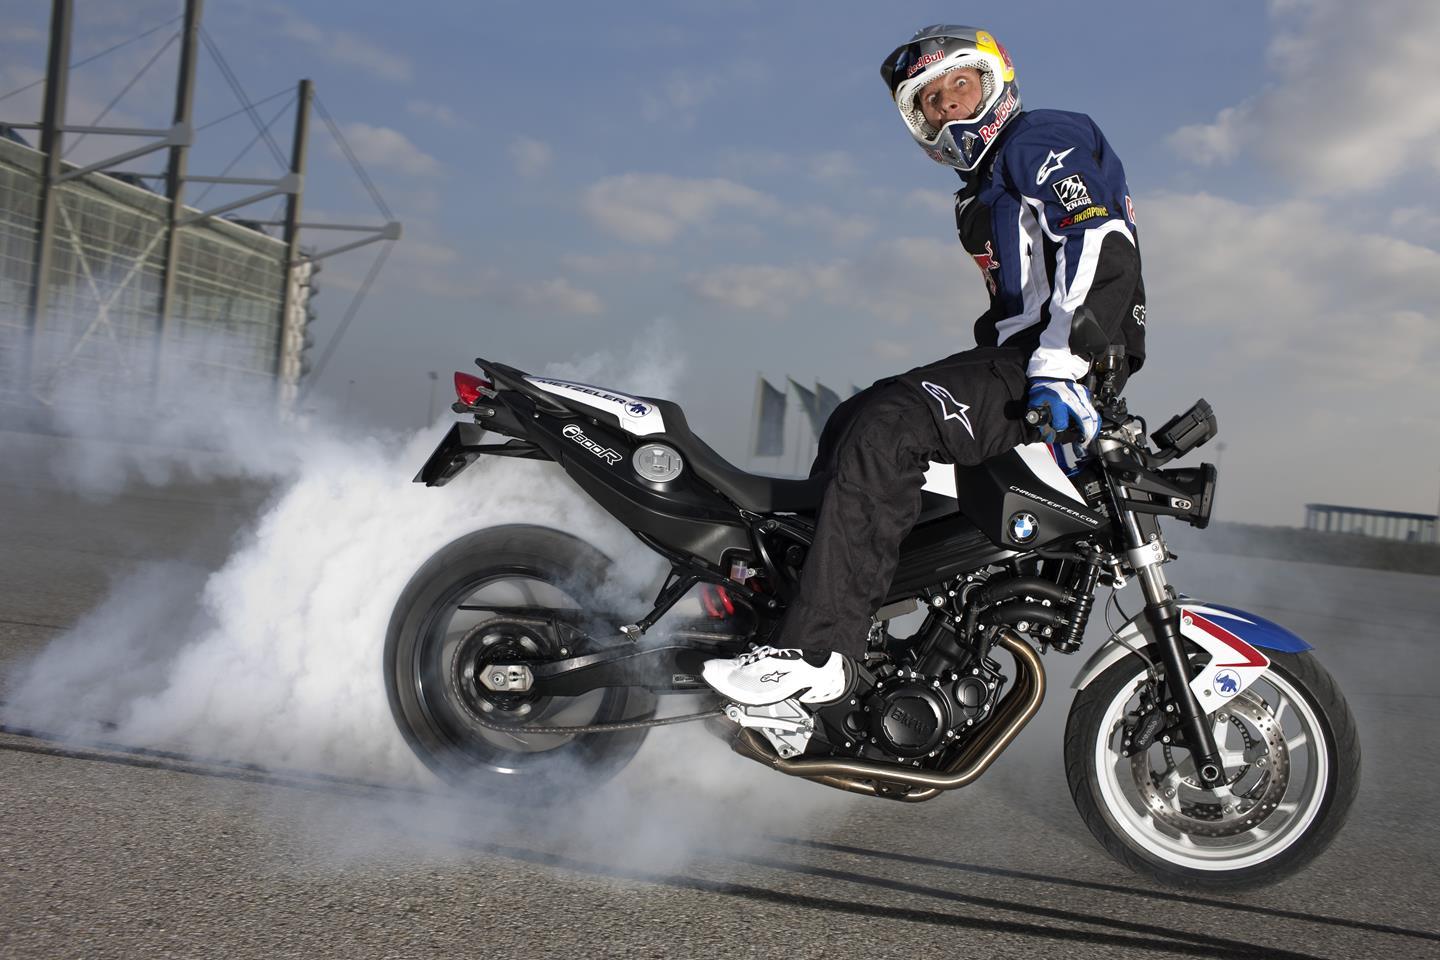 BMW F800R (2009-2019) Review | Owner & Expert Ratings